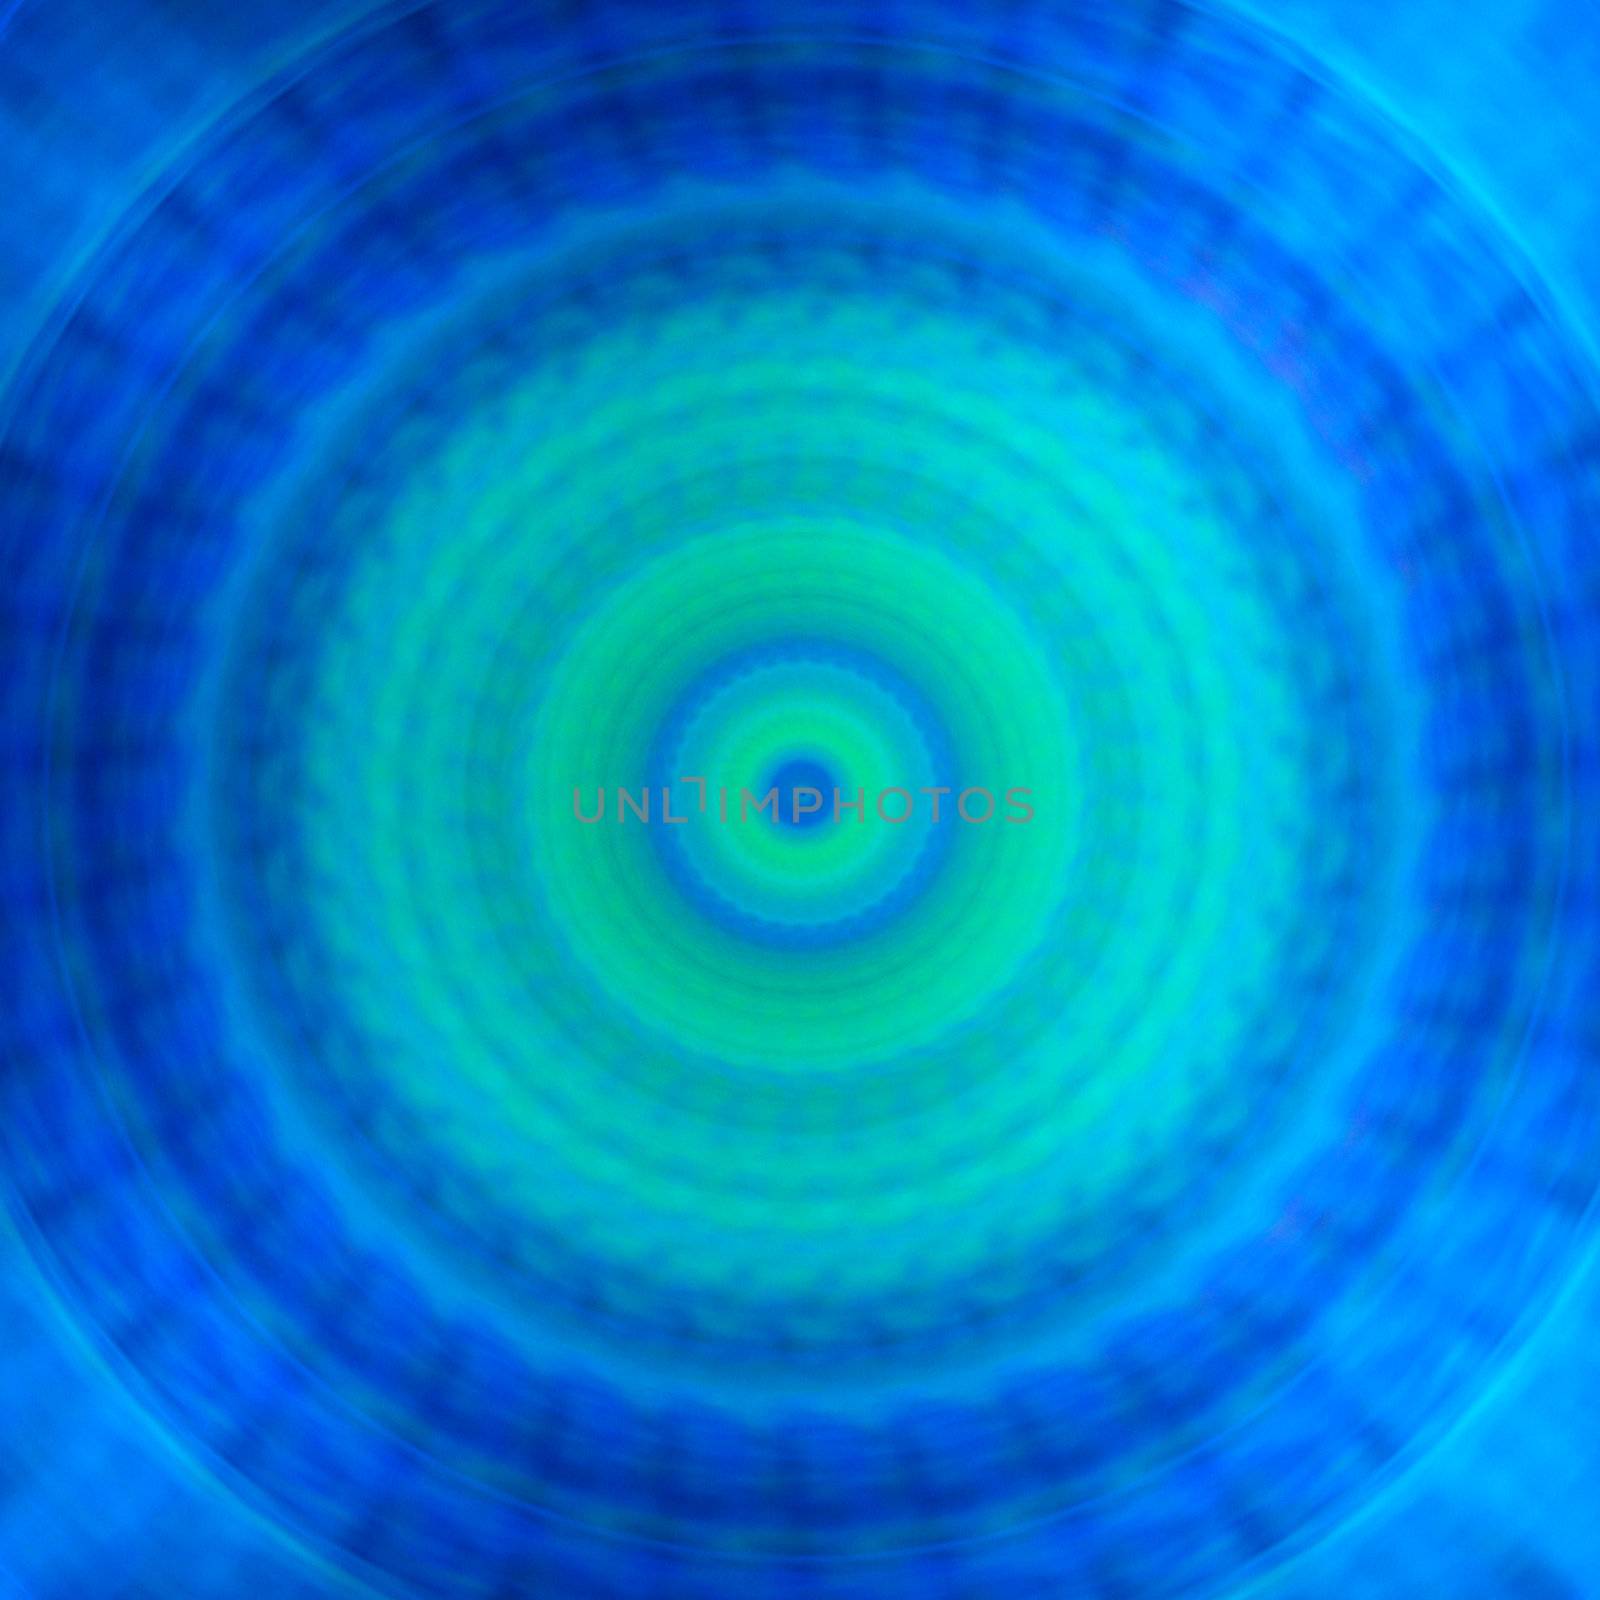 Circular shades of blue and green spiral background